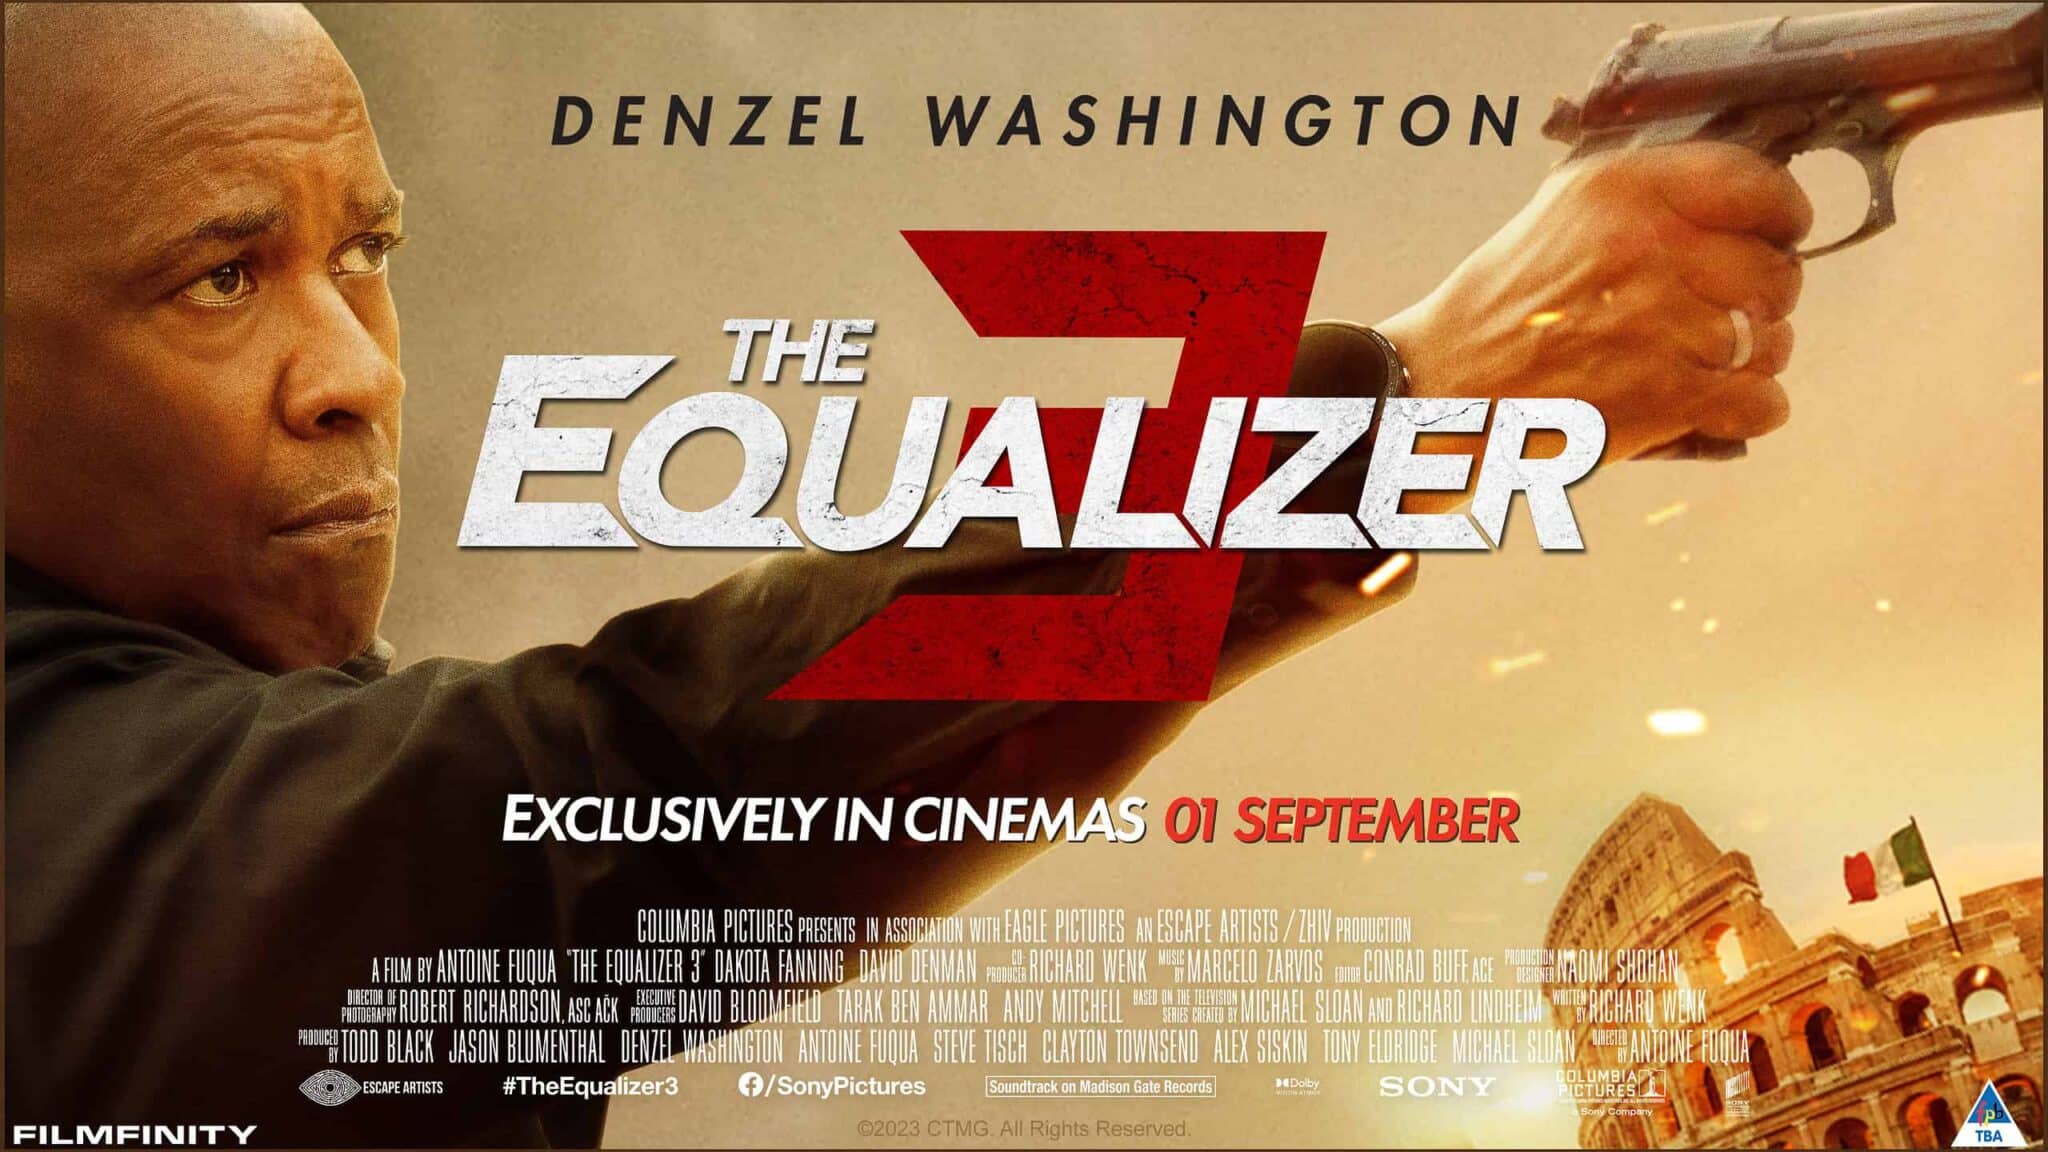 The Equalizer 3: The Final Chapter Concludes a Perfect Three-Act